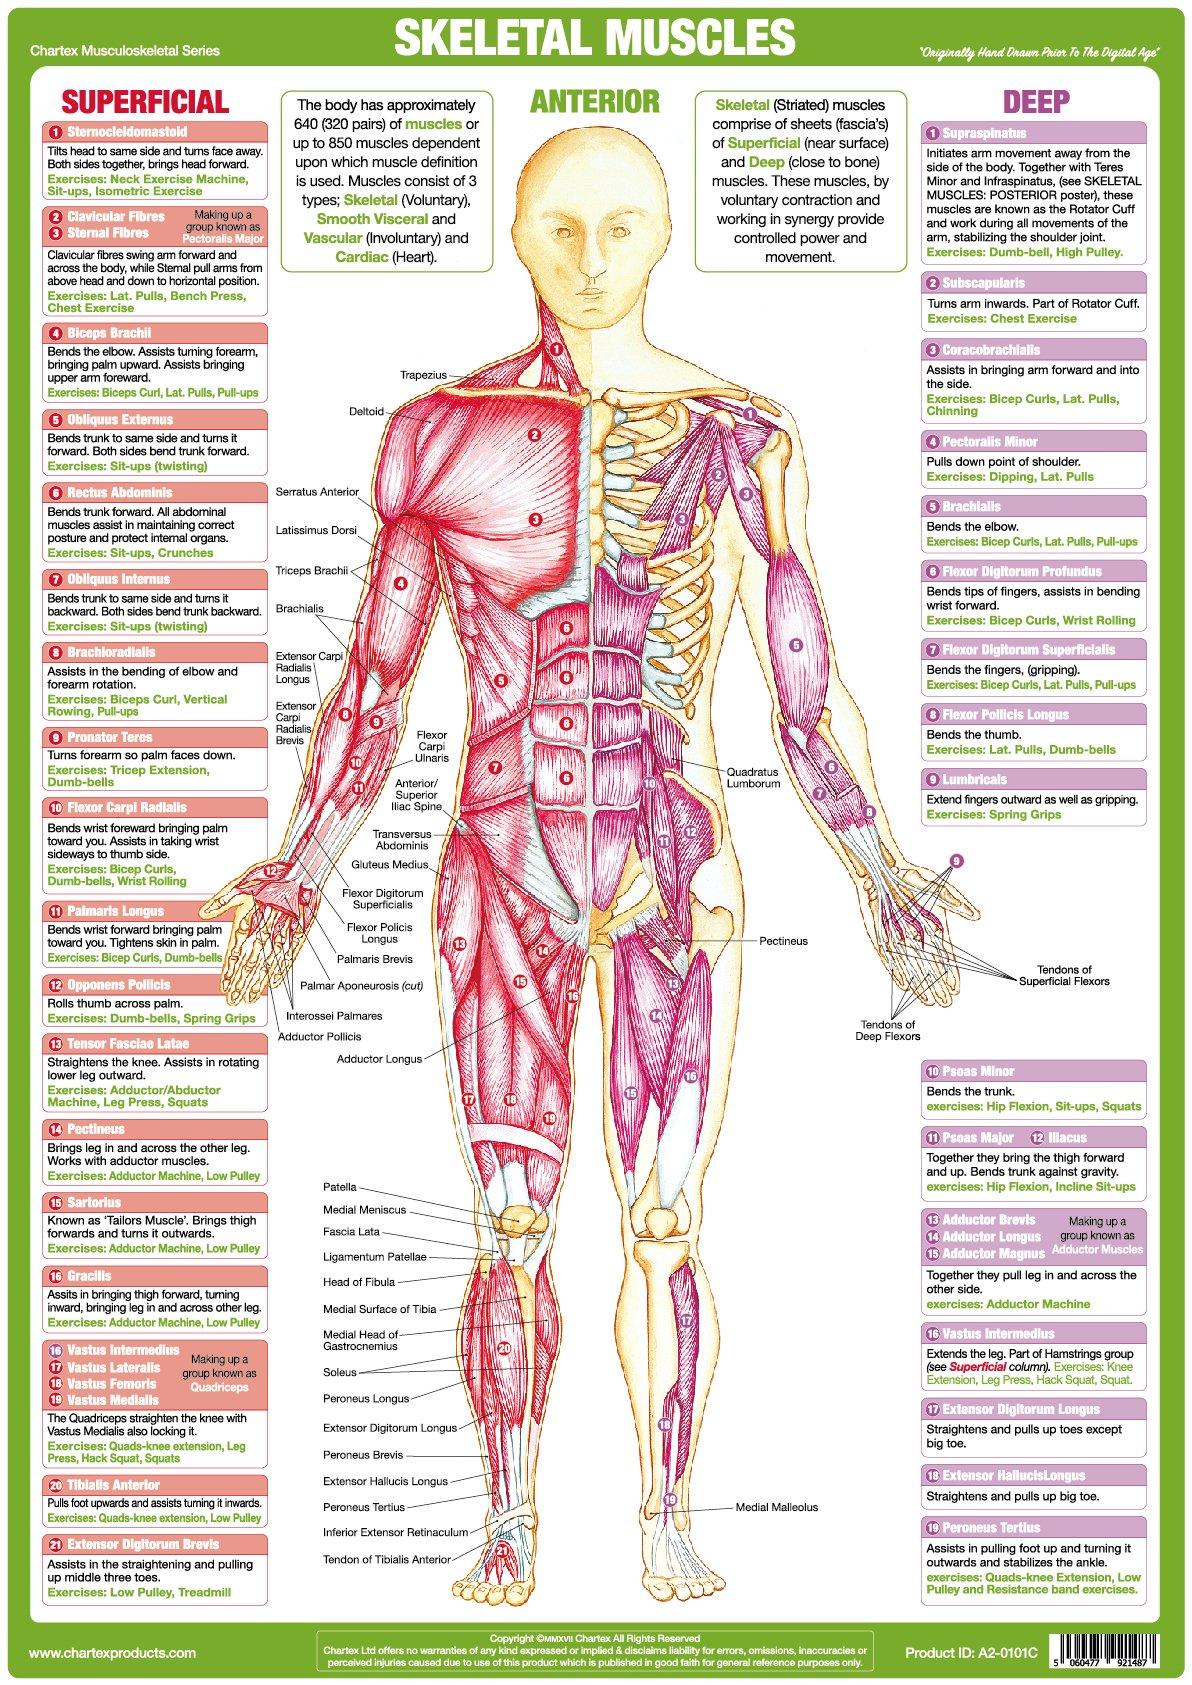 Muscle Anatomy Poster - Anterior